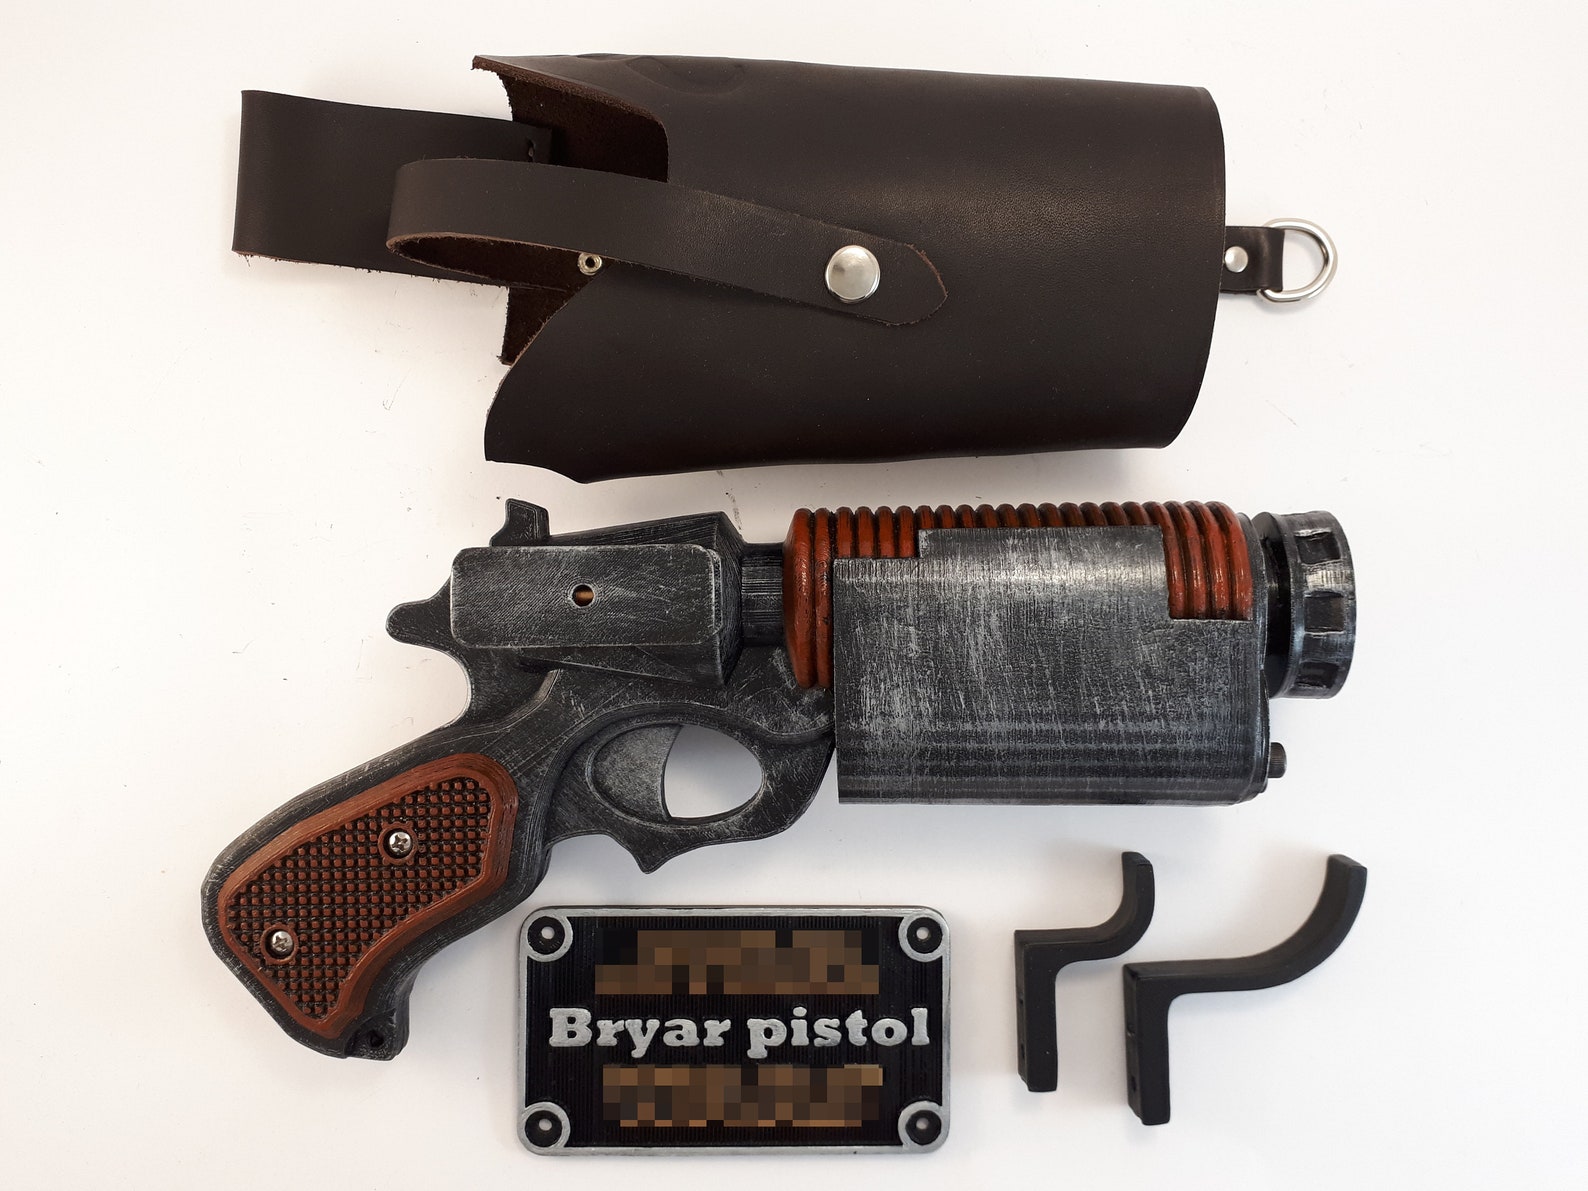 Bryar pistol real leather holster 3D printed cosplay image 0.